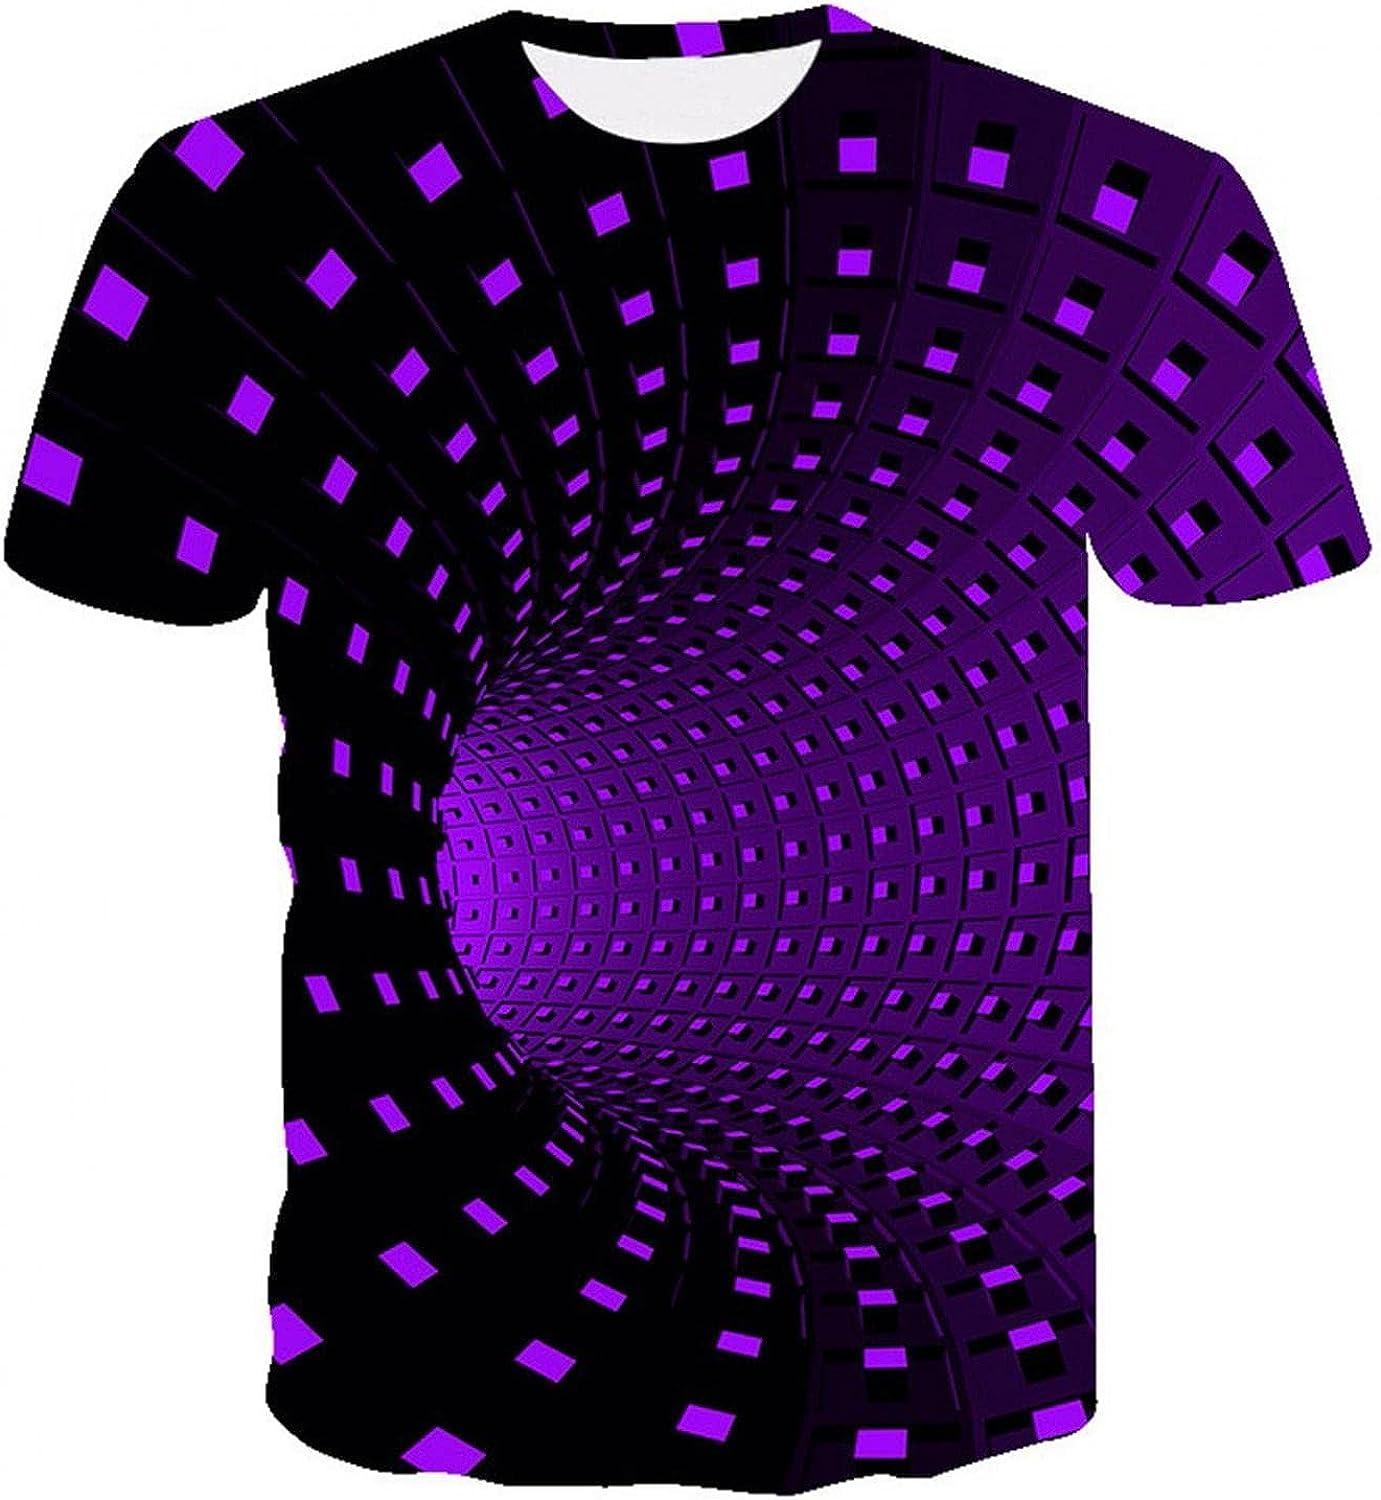 BIFUTON T Shirts for Men Graphic, Mens Graphic Tees Novelty Graphic Optical  Illusion T Shirts with Cool Designs XX-Large B-z-02-purple